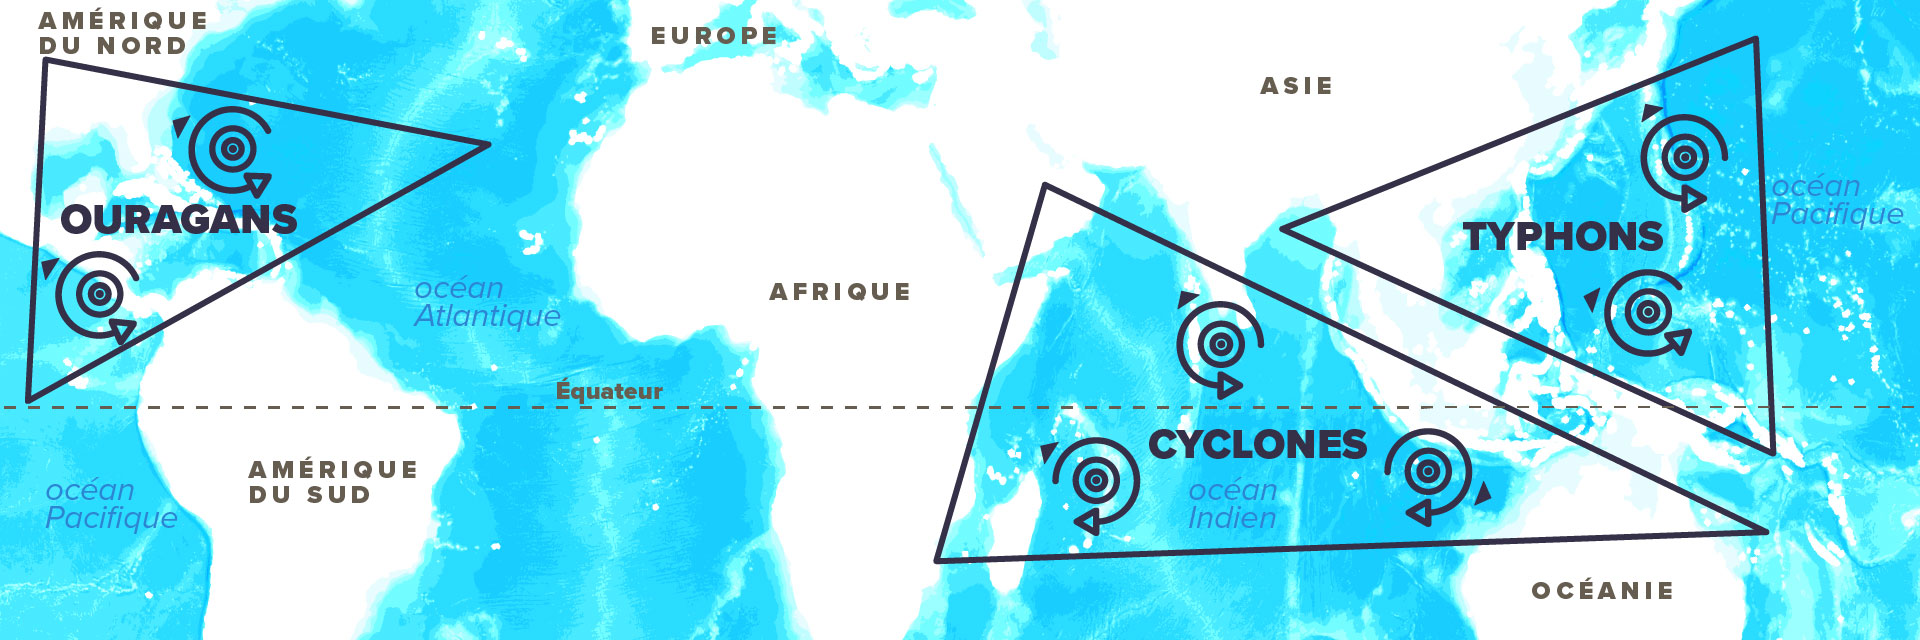 carte cyclones, ouragans et typhons